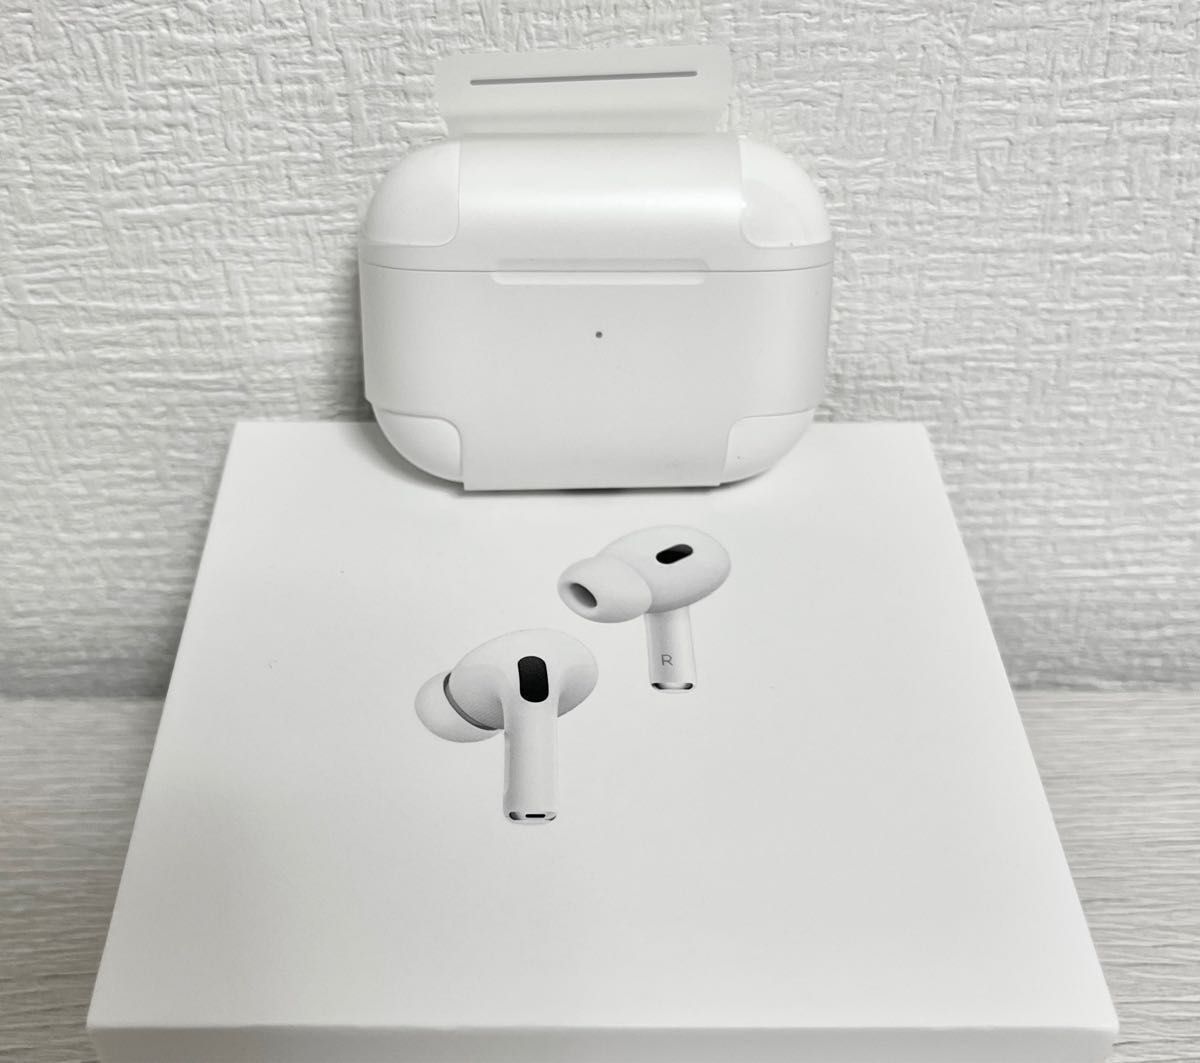 Apple AirPods Pro 第2世代　MQD83J/A メーカー保証2024/01/29まで残っています